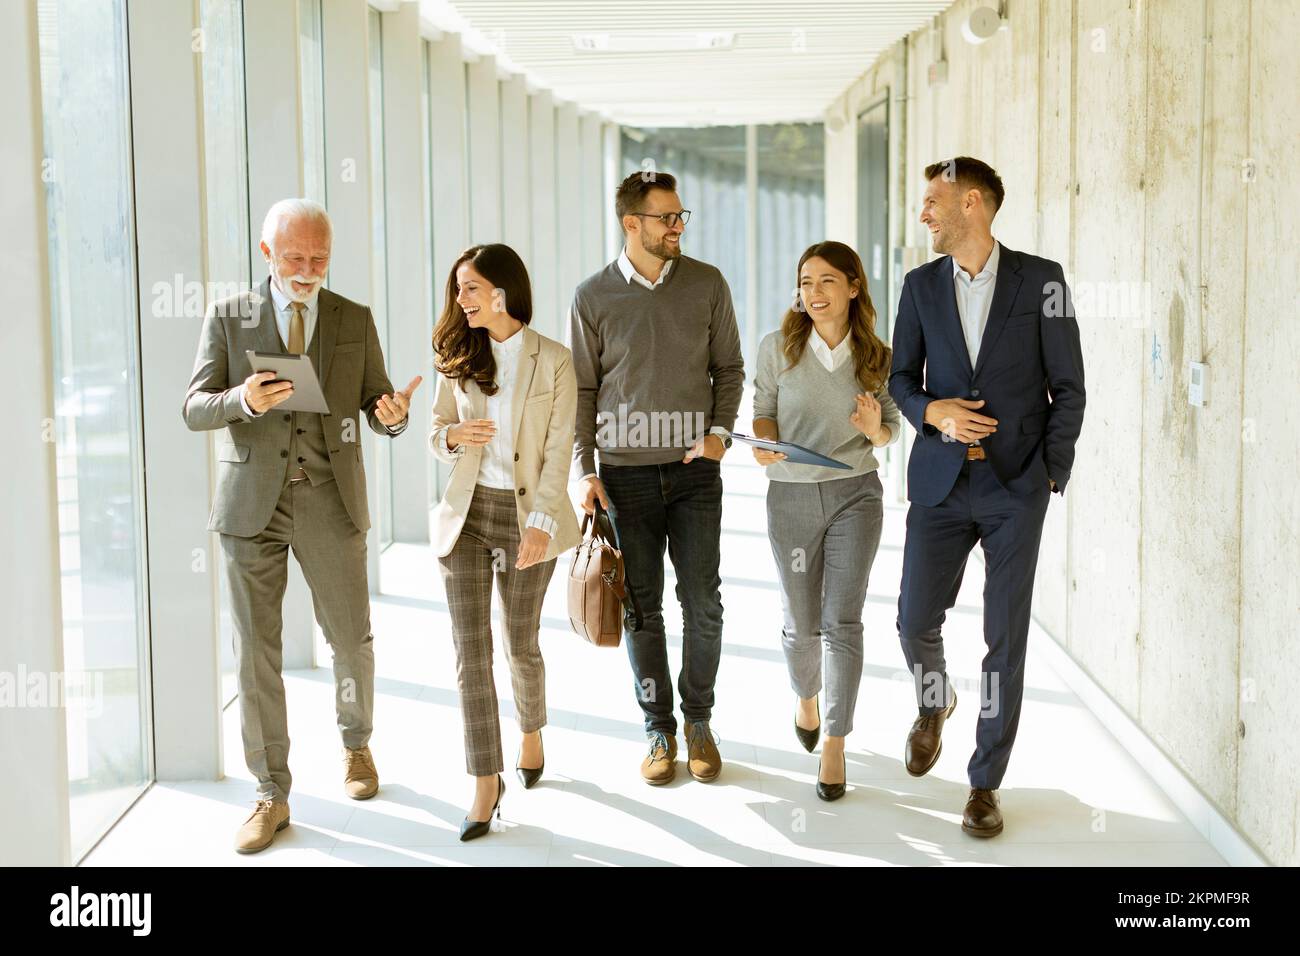 Group of corporate business professionals walking through office corridor on a sunny day Stock Photo